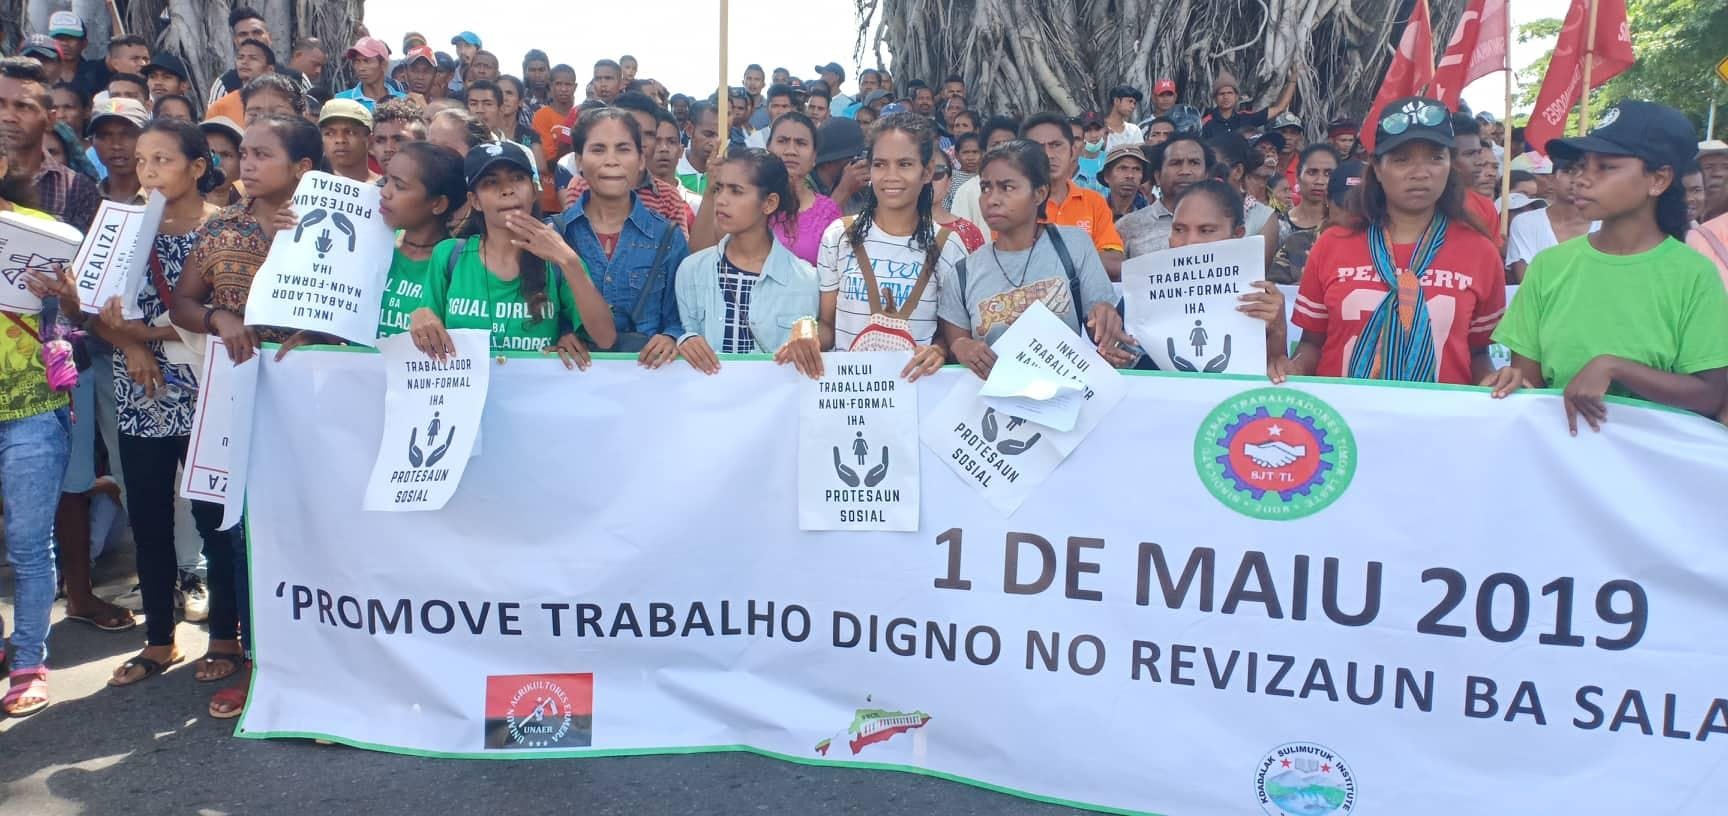 Spotlight on Workers' Rights in Timor Leste 2019